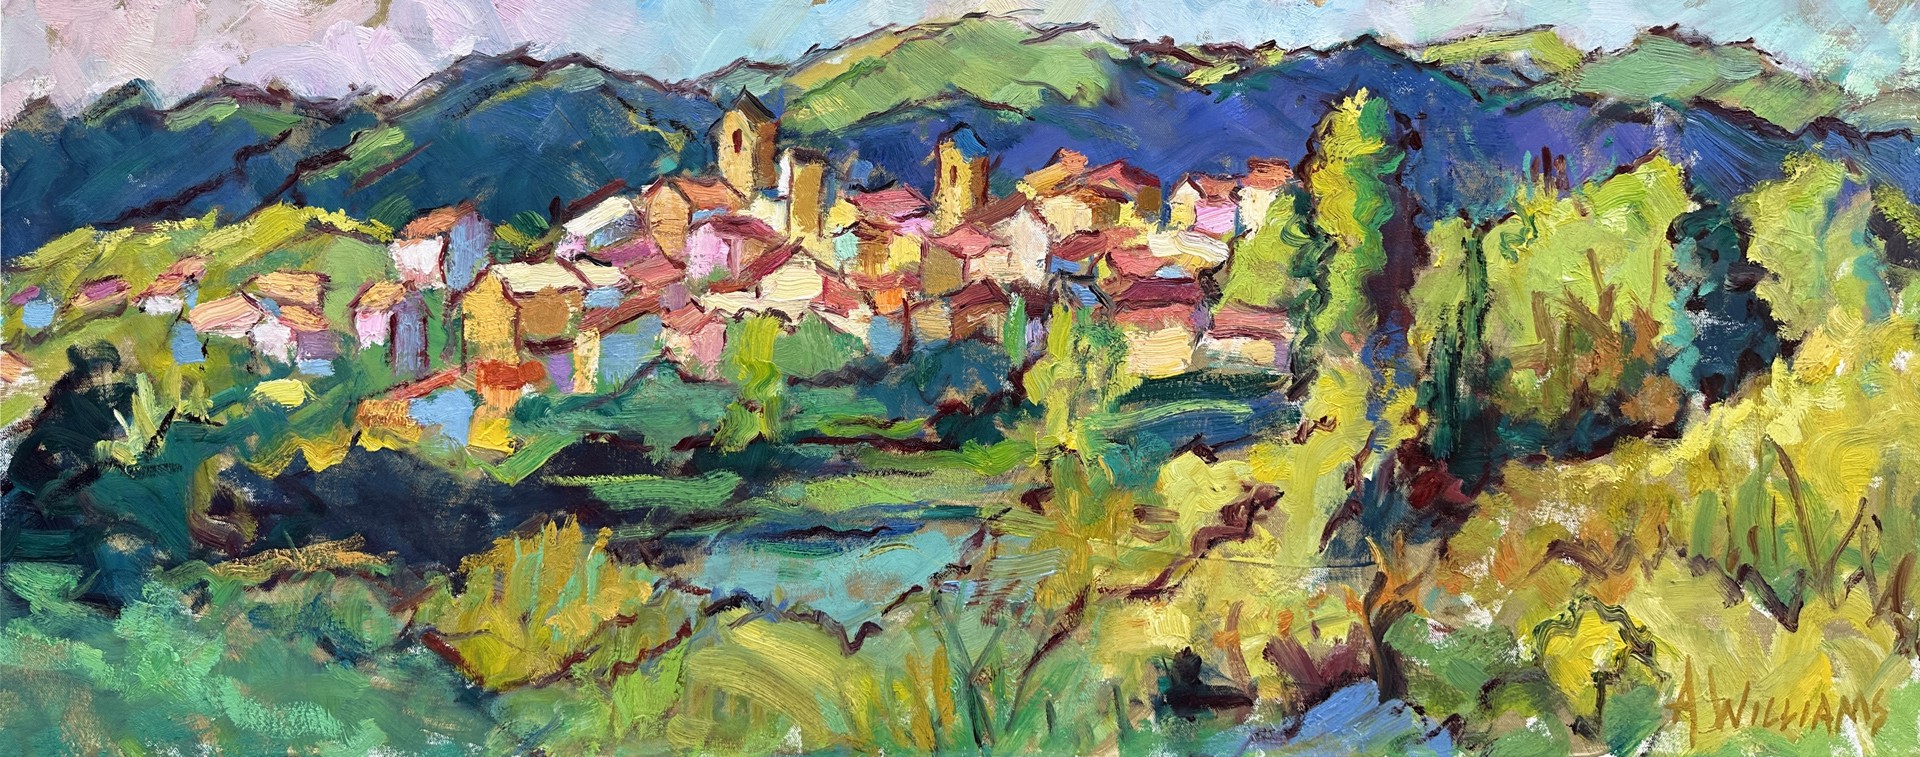 "The Glory of Lourmarin" Original oil painting by Alice Williams.